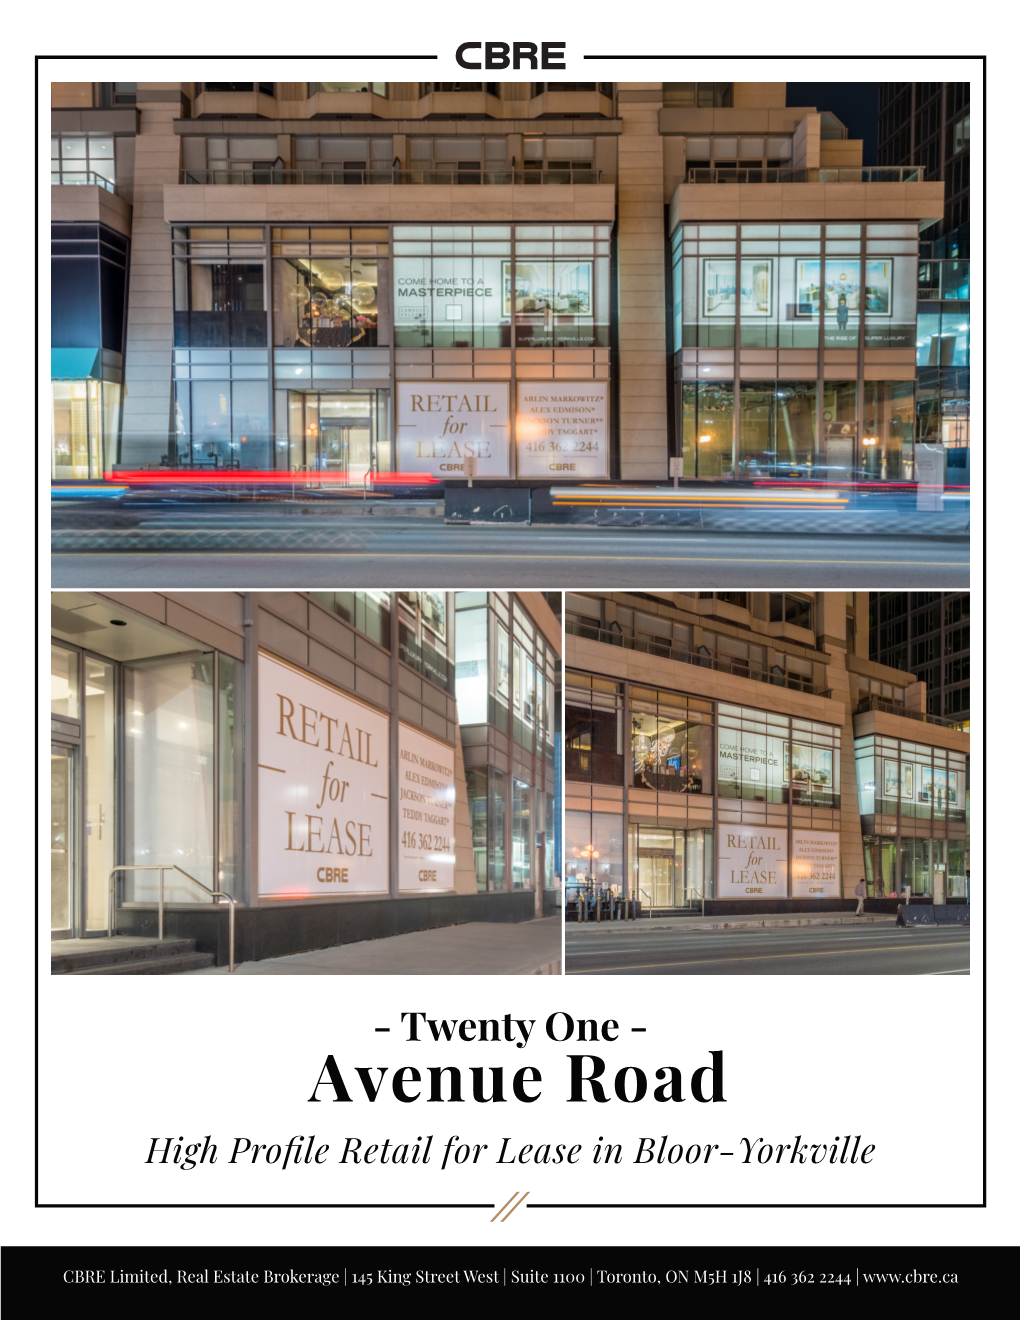 Avenue Road High Profile Retail for Lease in Bloor-Yorkville